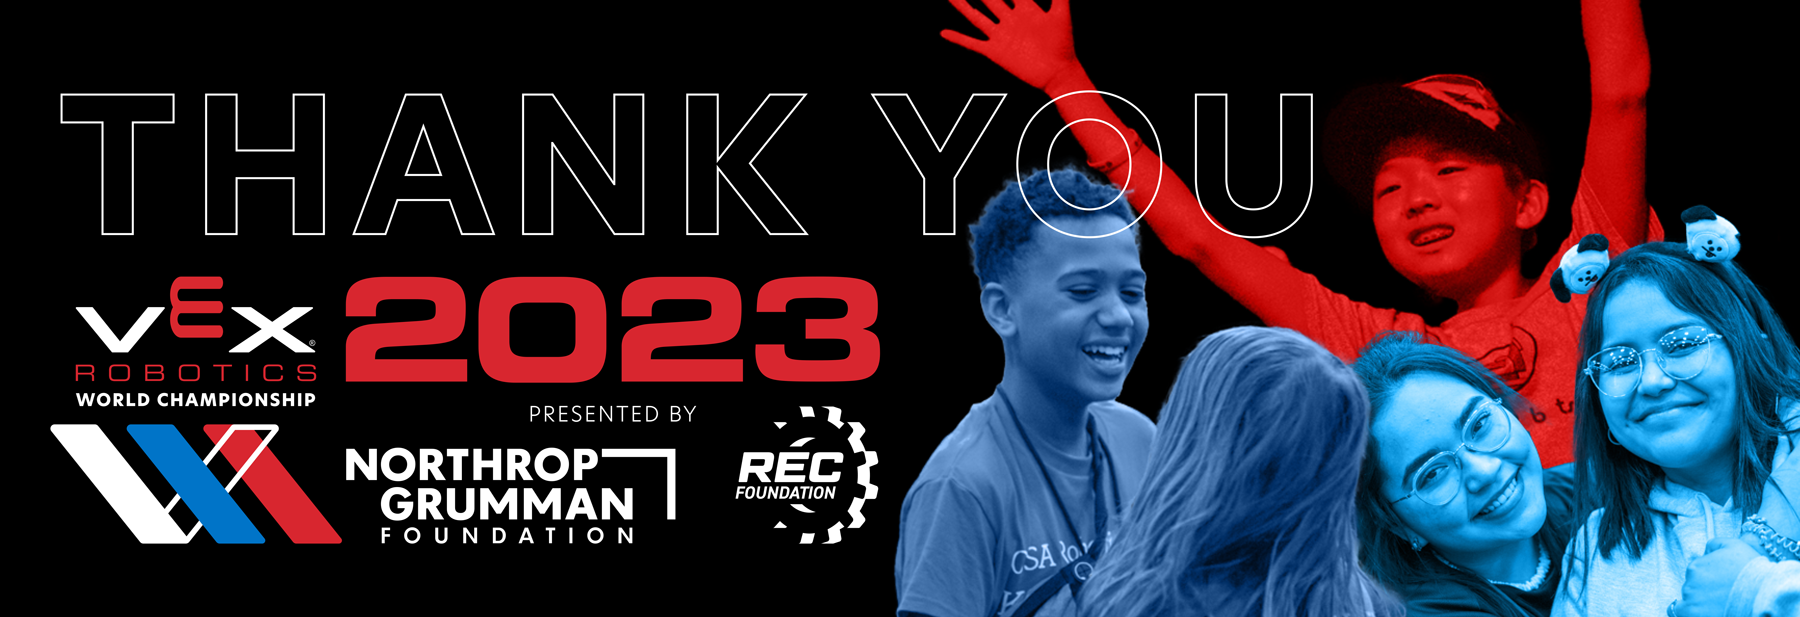 Thank you for making VEX Worlds 2023 possible. We couldn't do it without you!